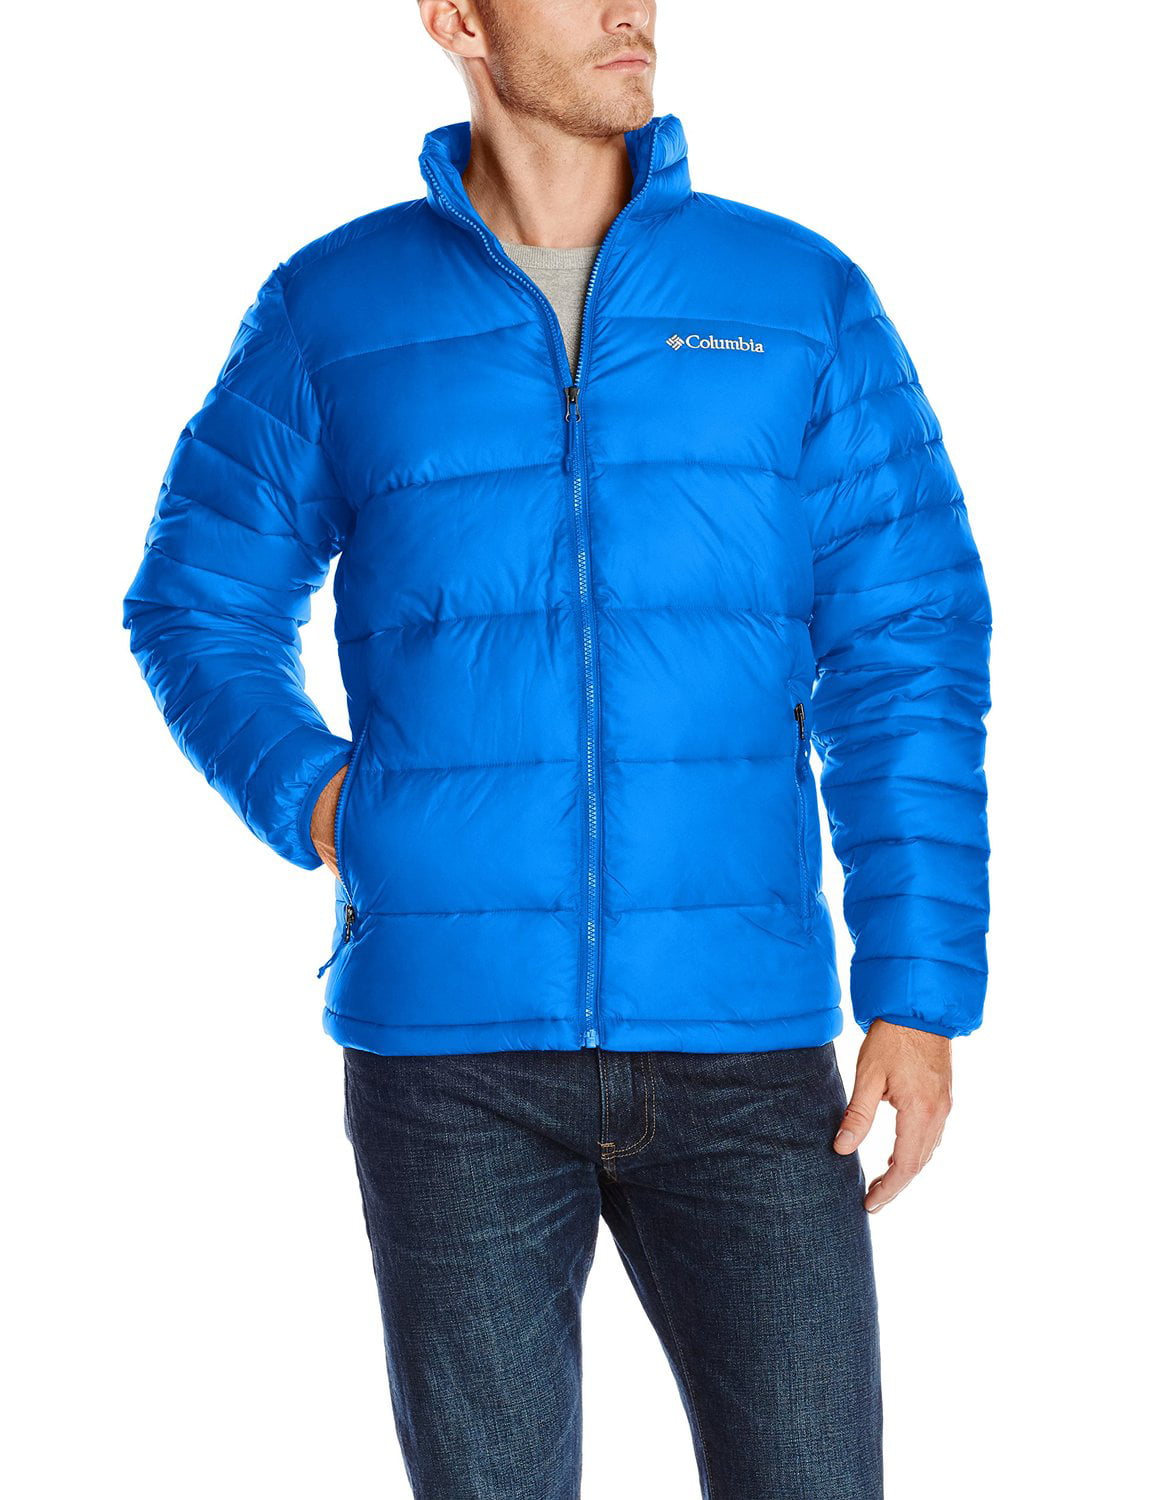 Columbia Mens Frost Fighter Insulated Jacket Columbia Men's Sportswear 1562011